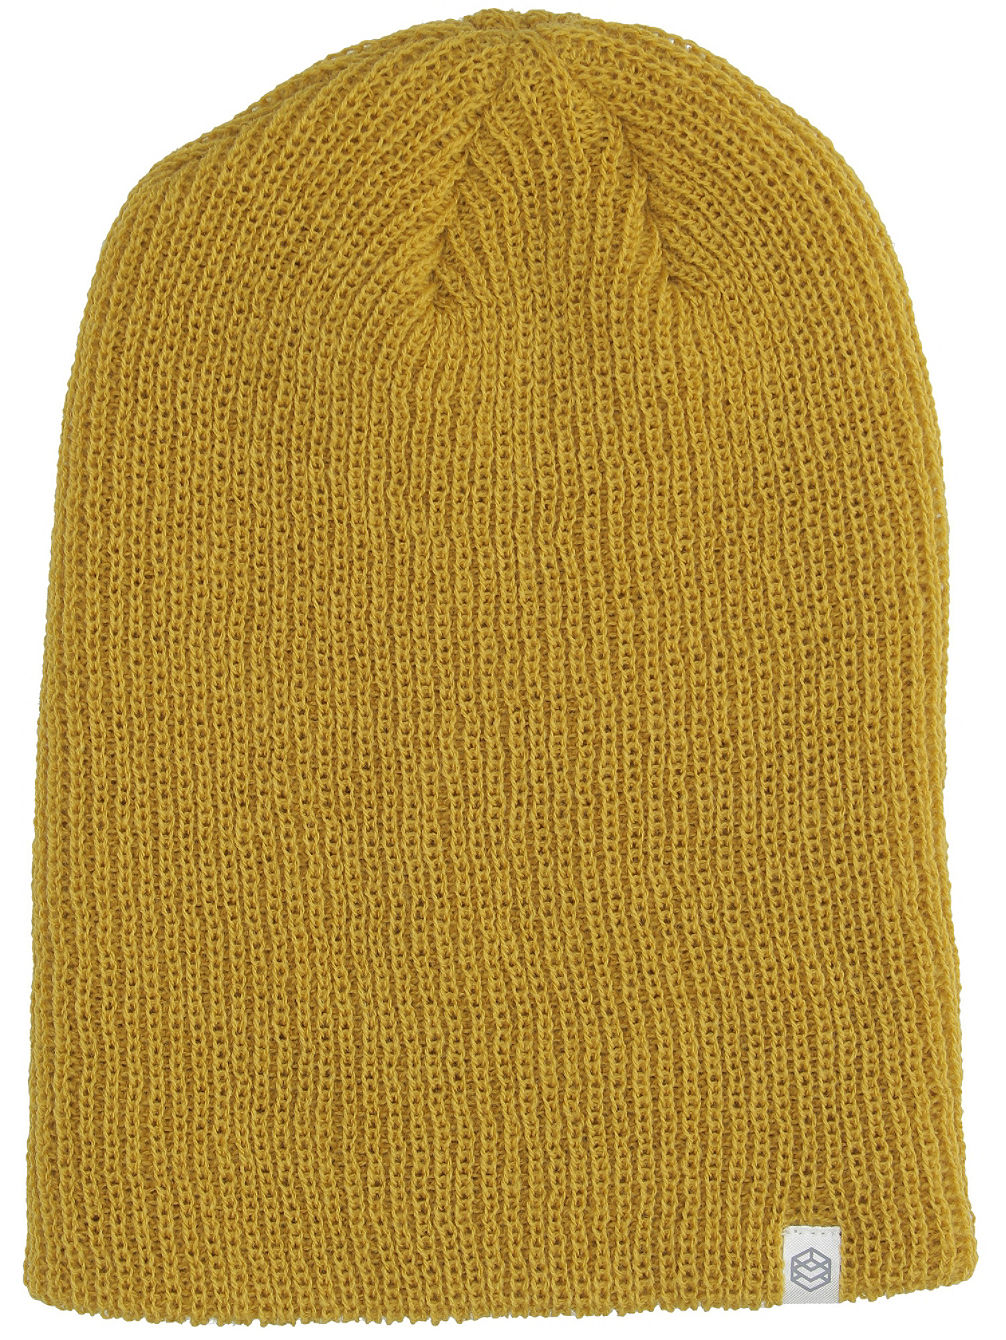 Toque Knit Slouch Kapa